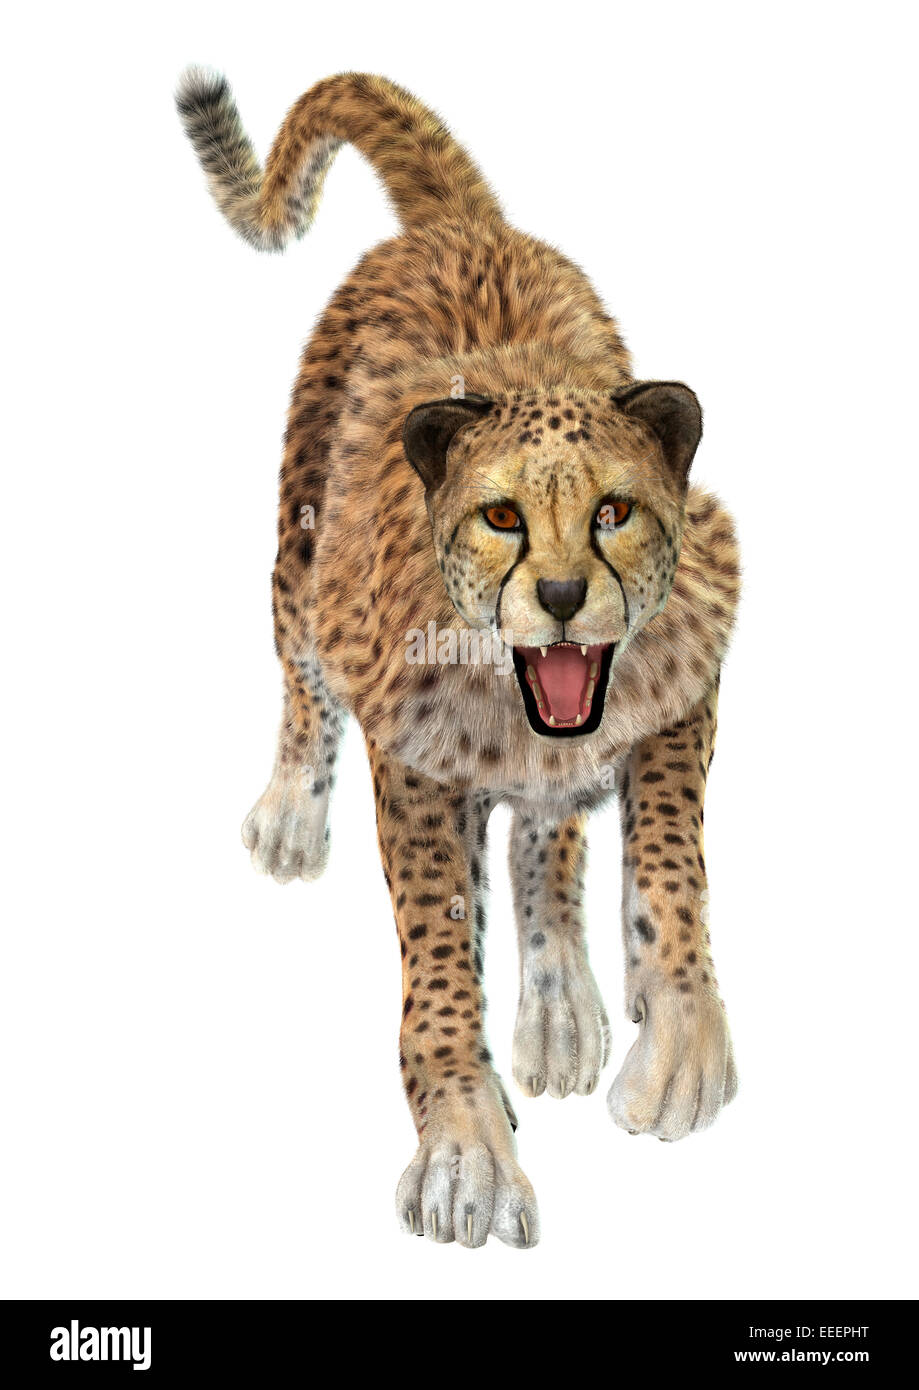 3D digital render of a running cheetah isolated on white background Stock Photo